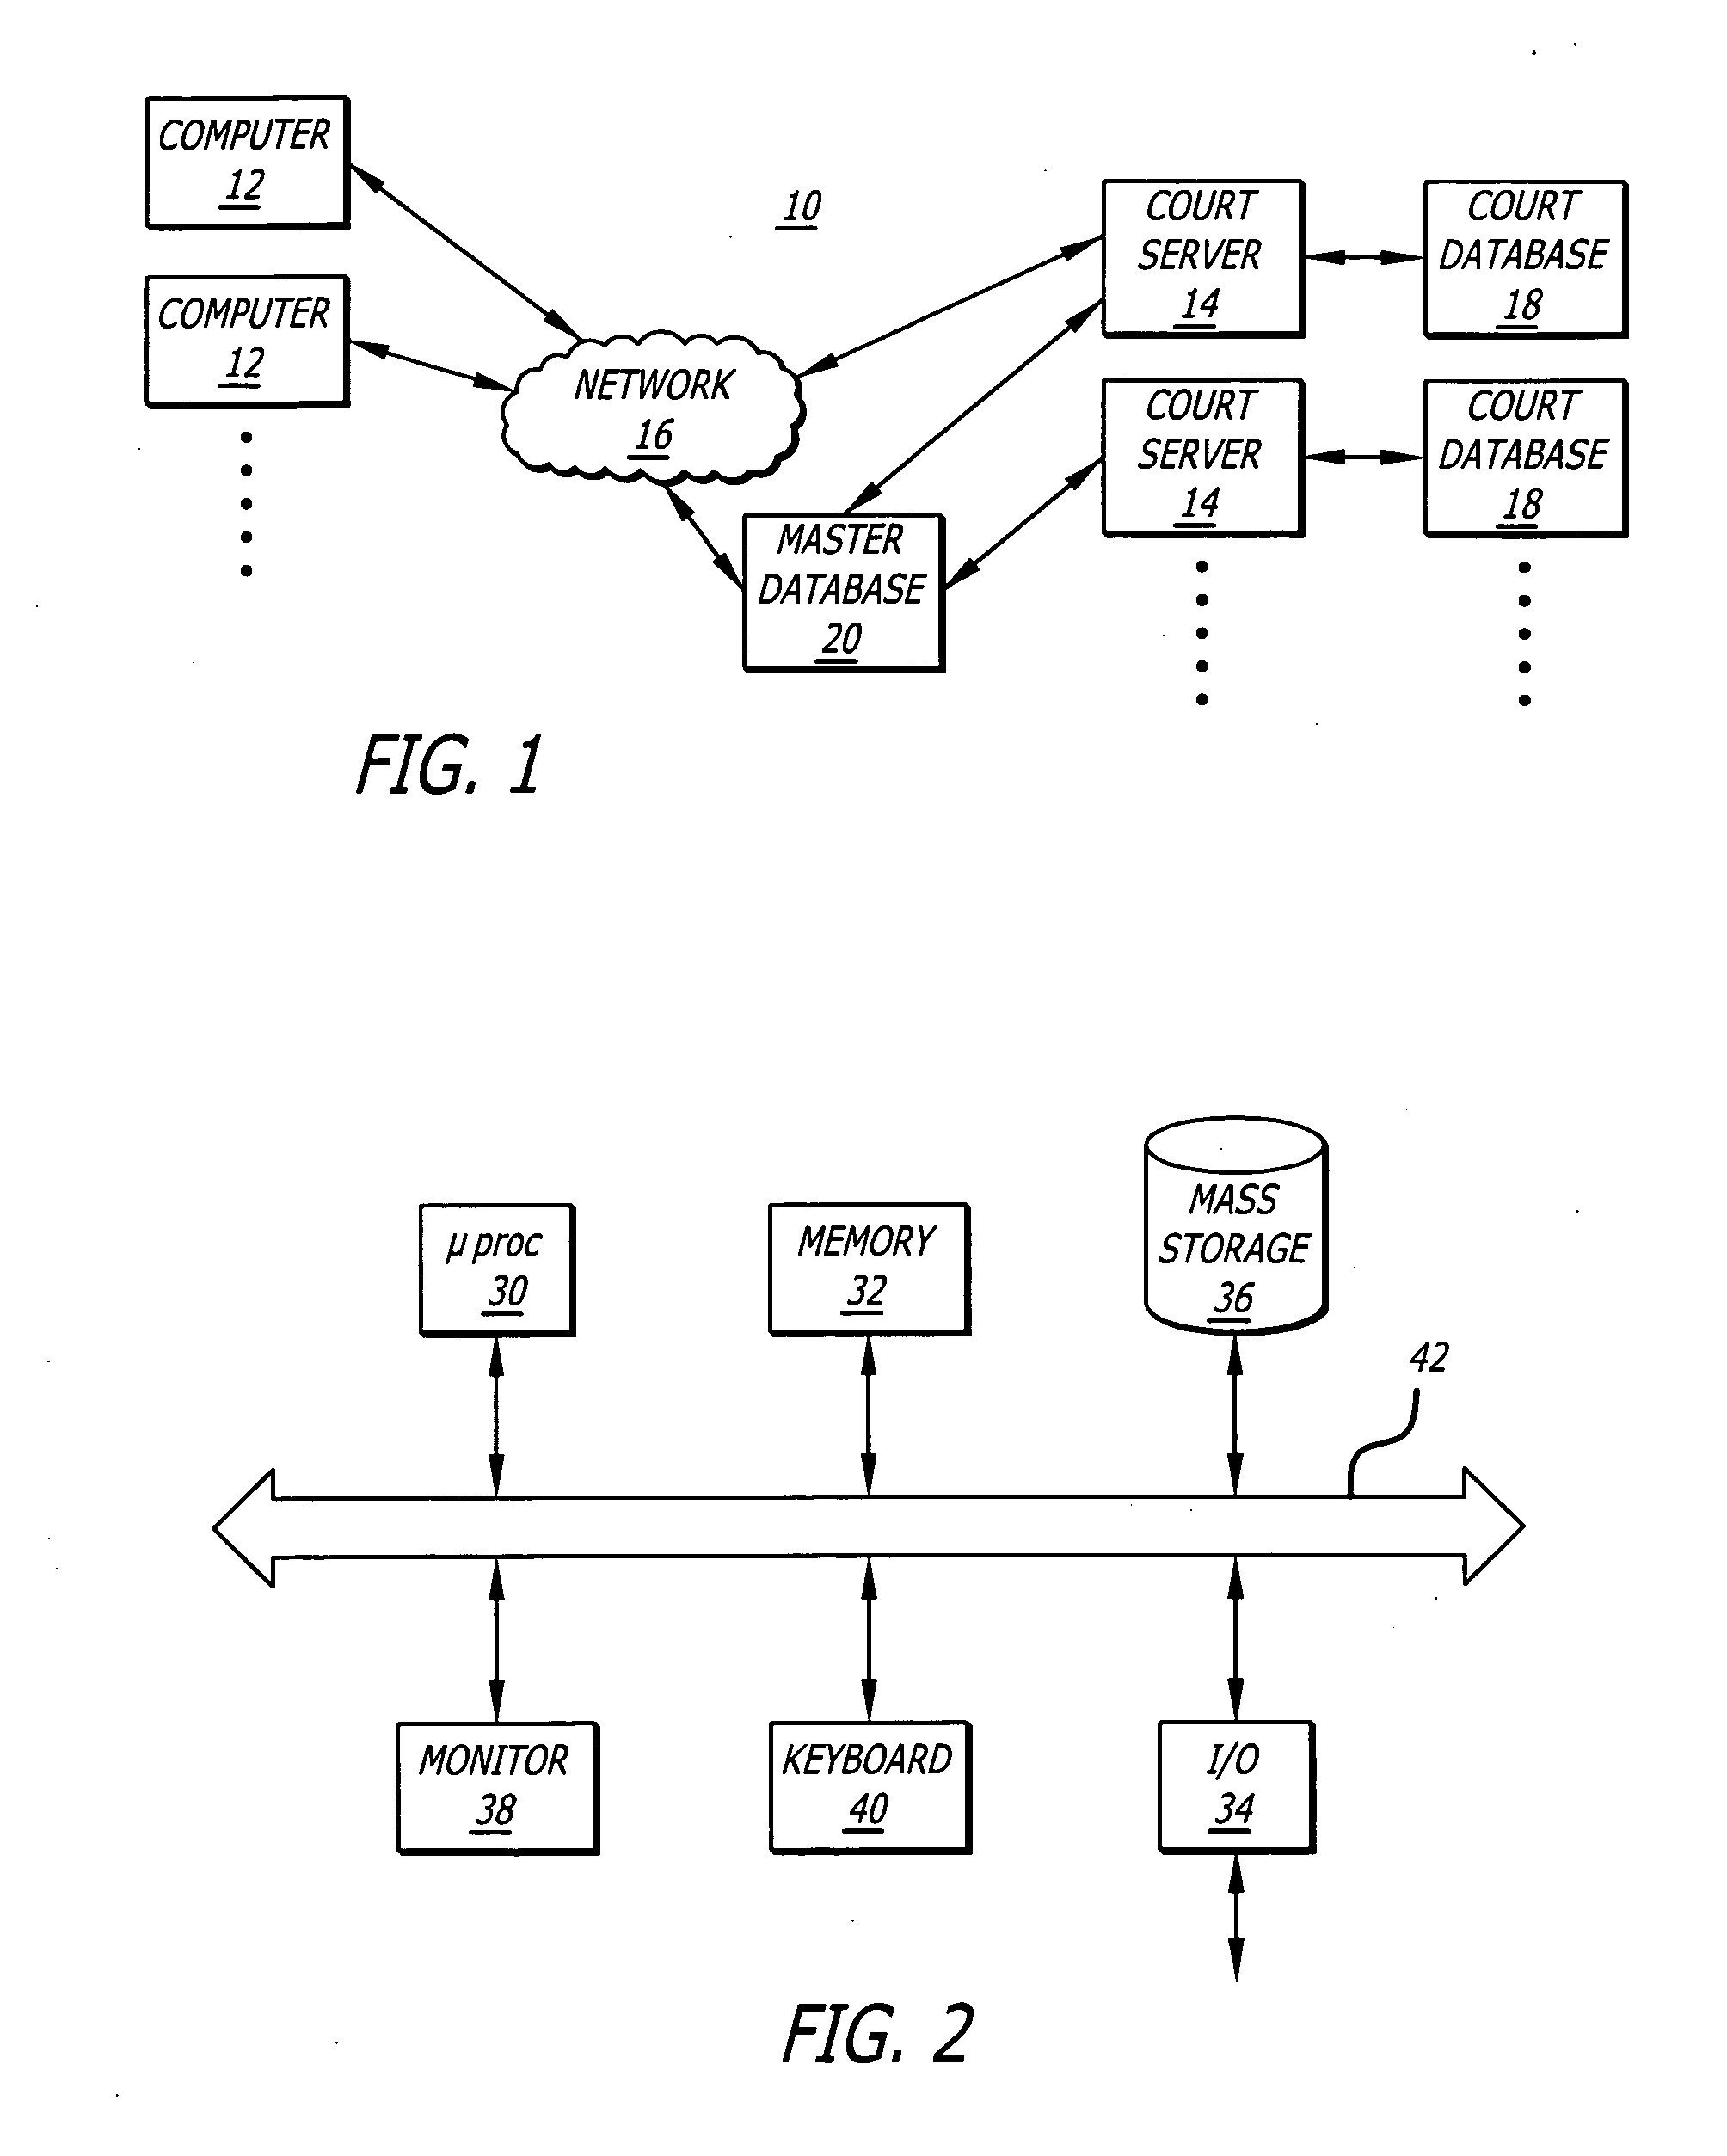 Court electronic filing system